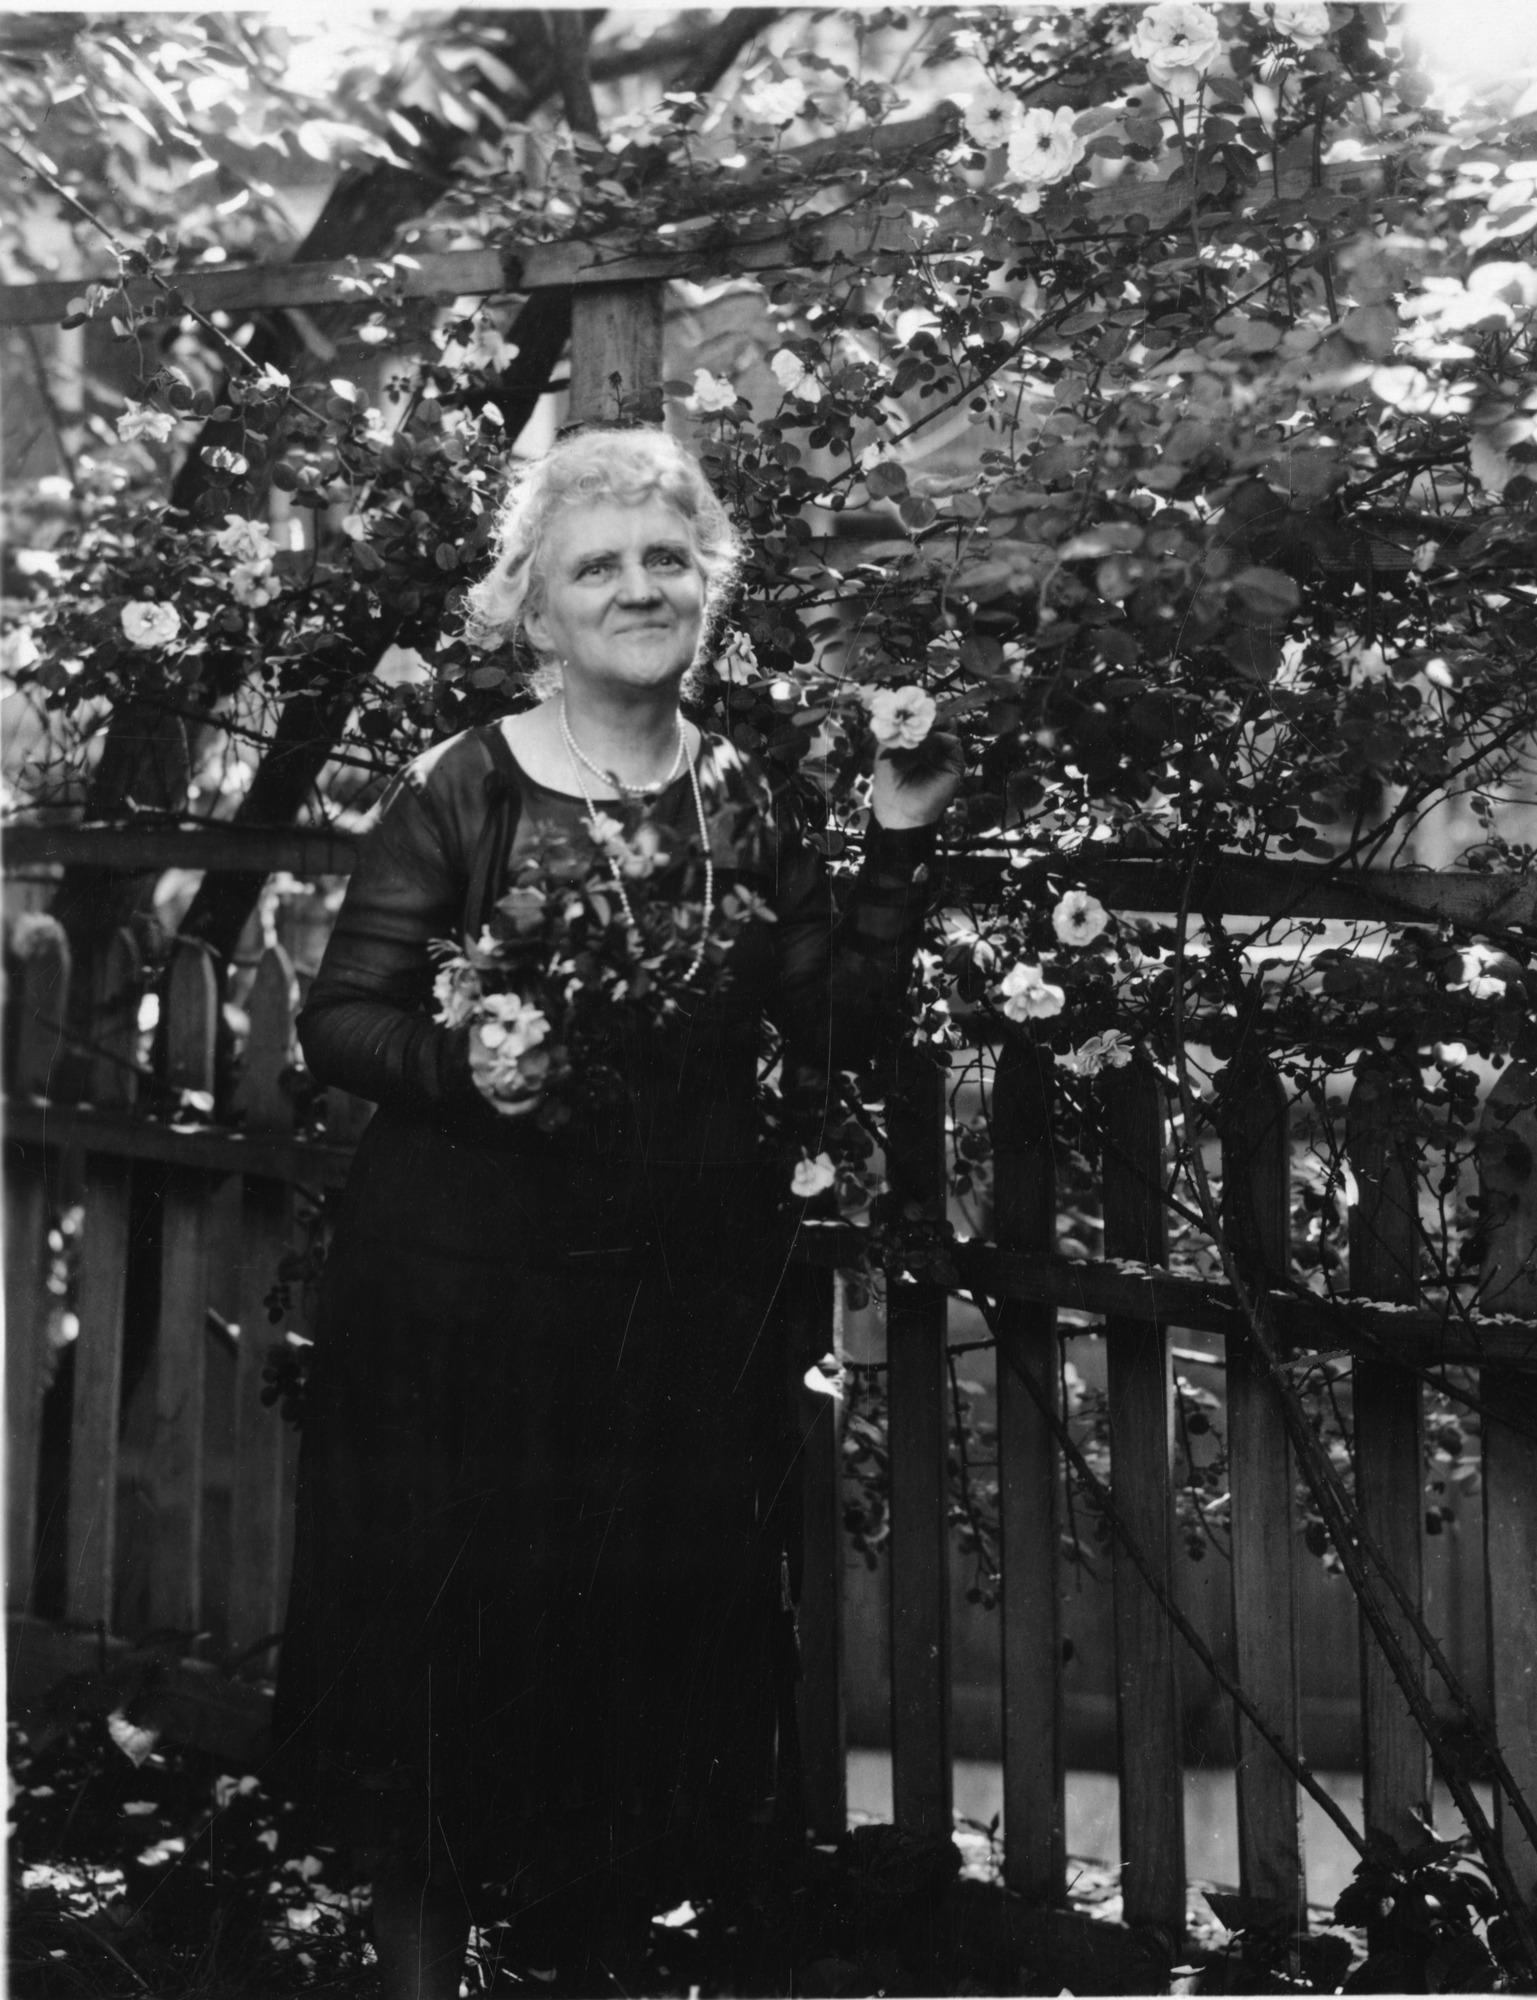 Woman stading along a fence surrounded by climbing roses